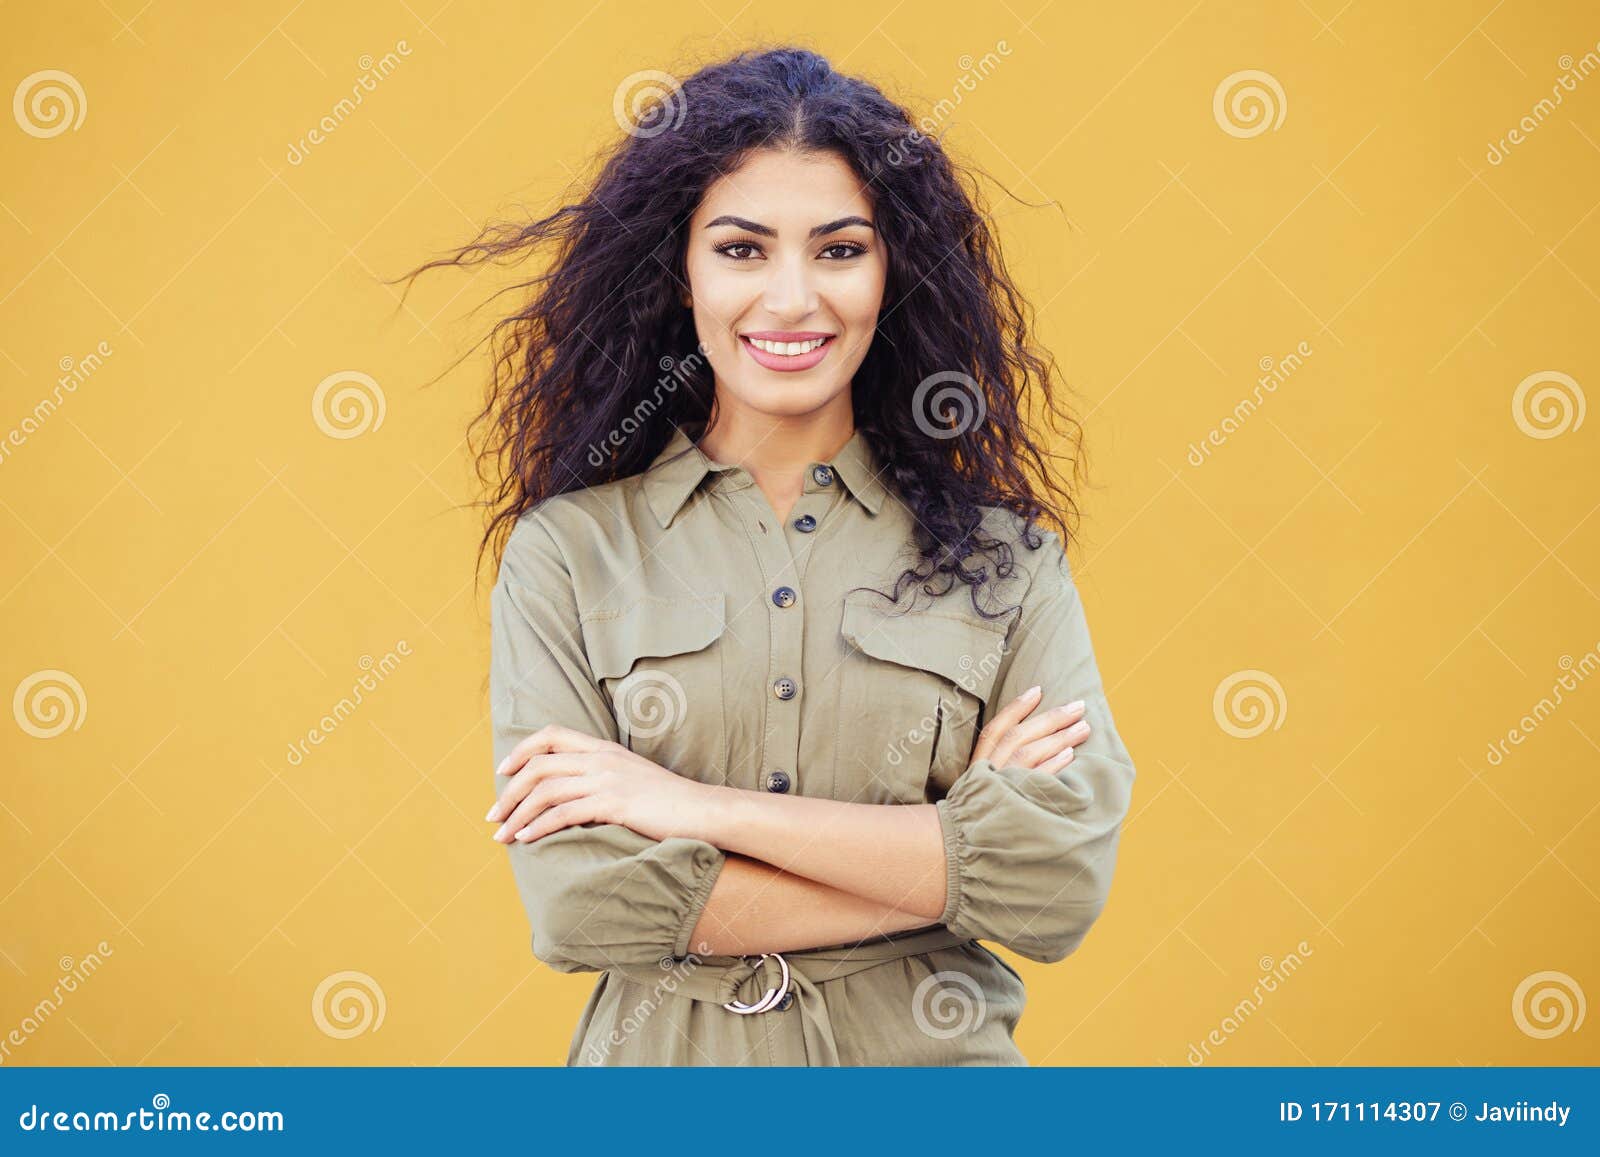 Young Arab Woman With Curly Hair Outdoors Stock Image Image Of Moving